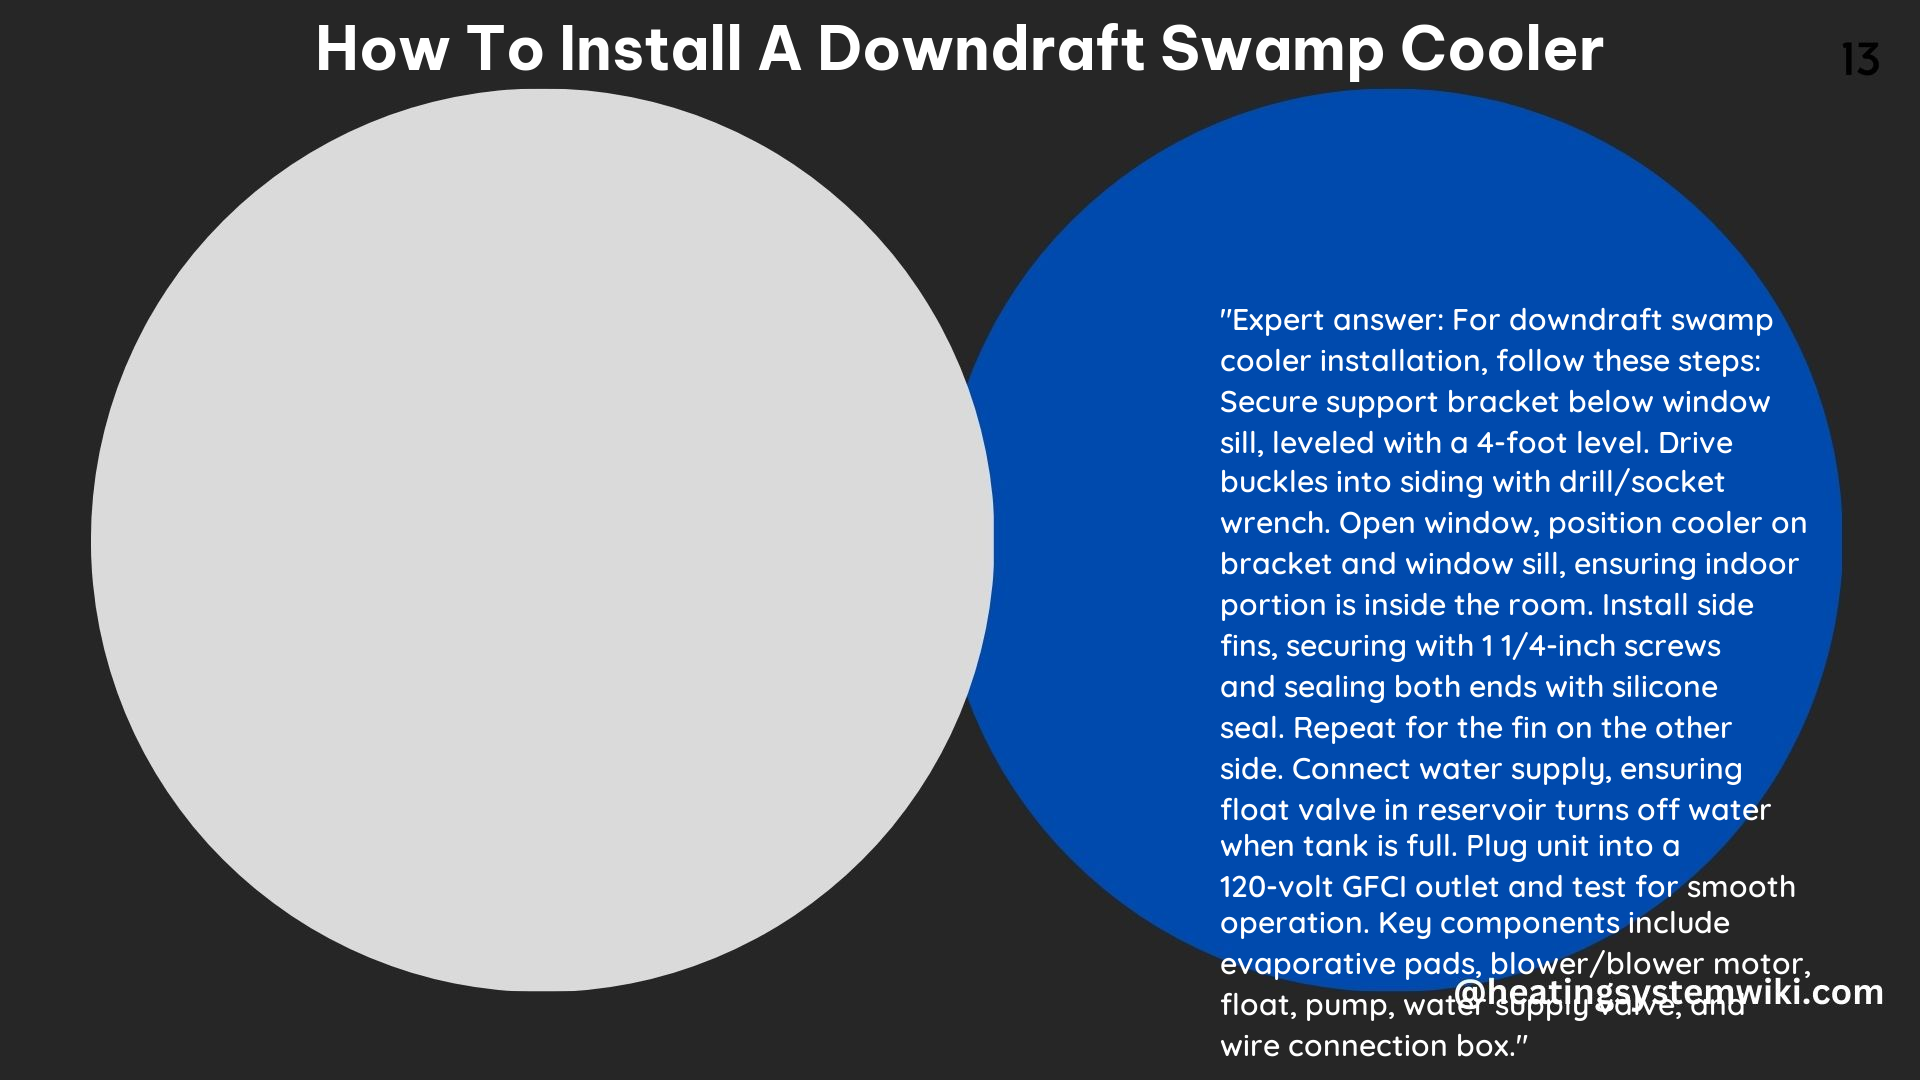 How to Install a Downdraft Swamp Cooler